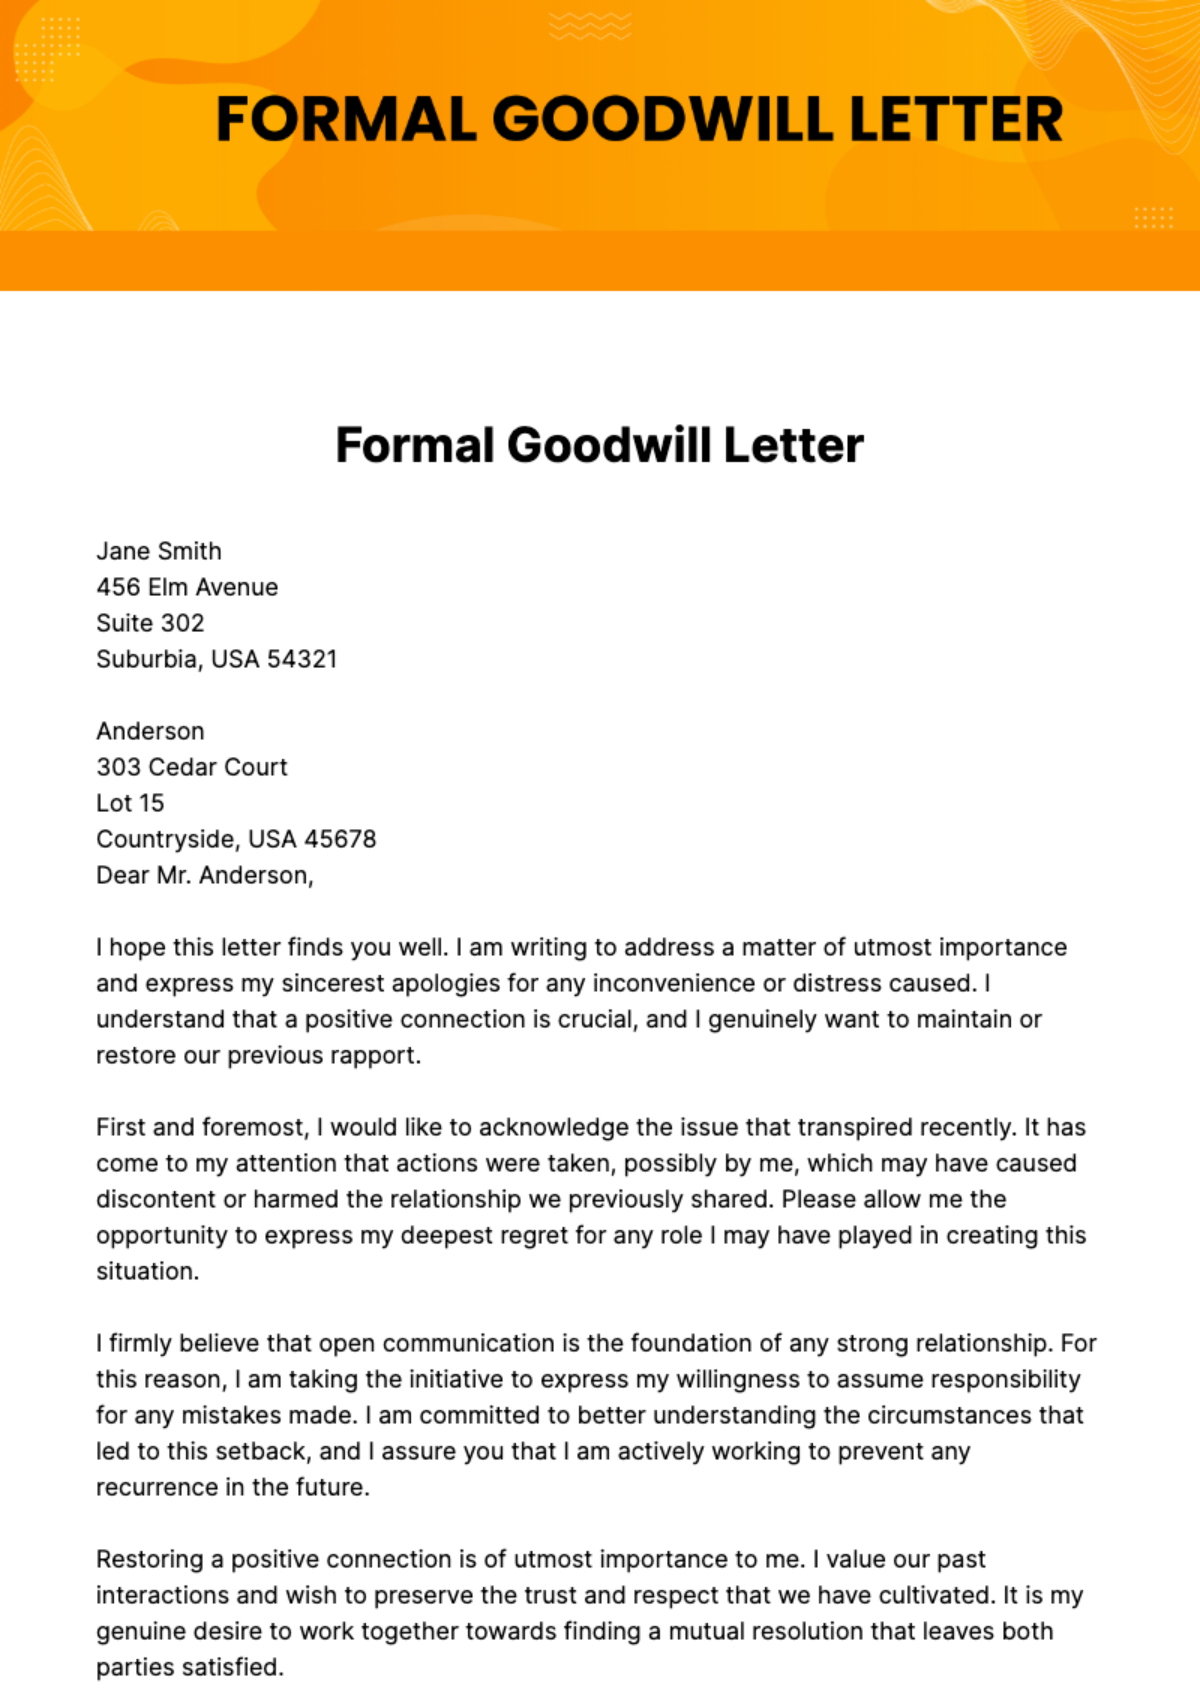 Formal Goodwill Letter Template